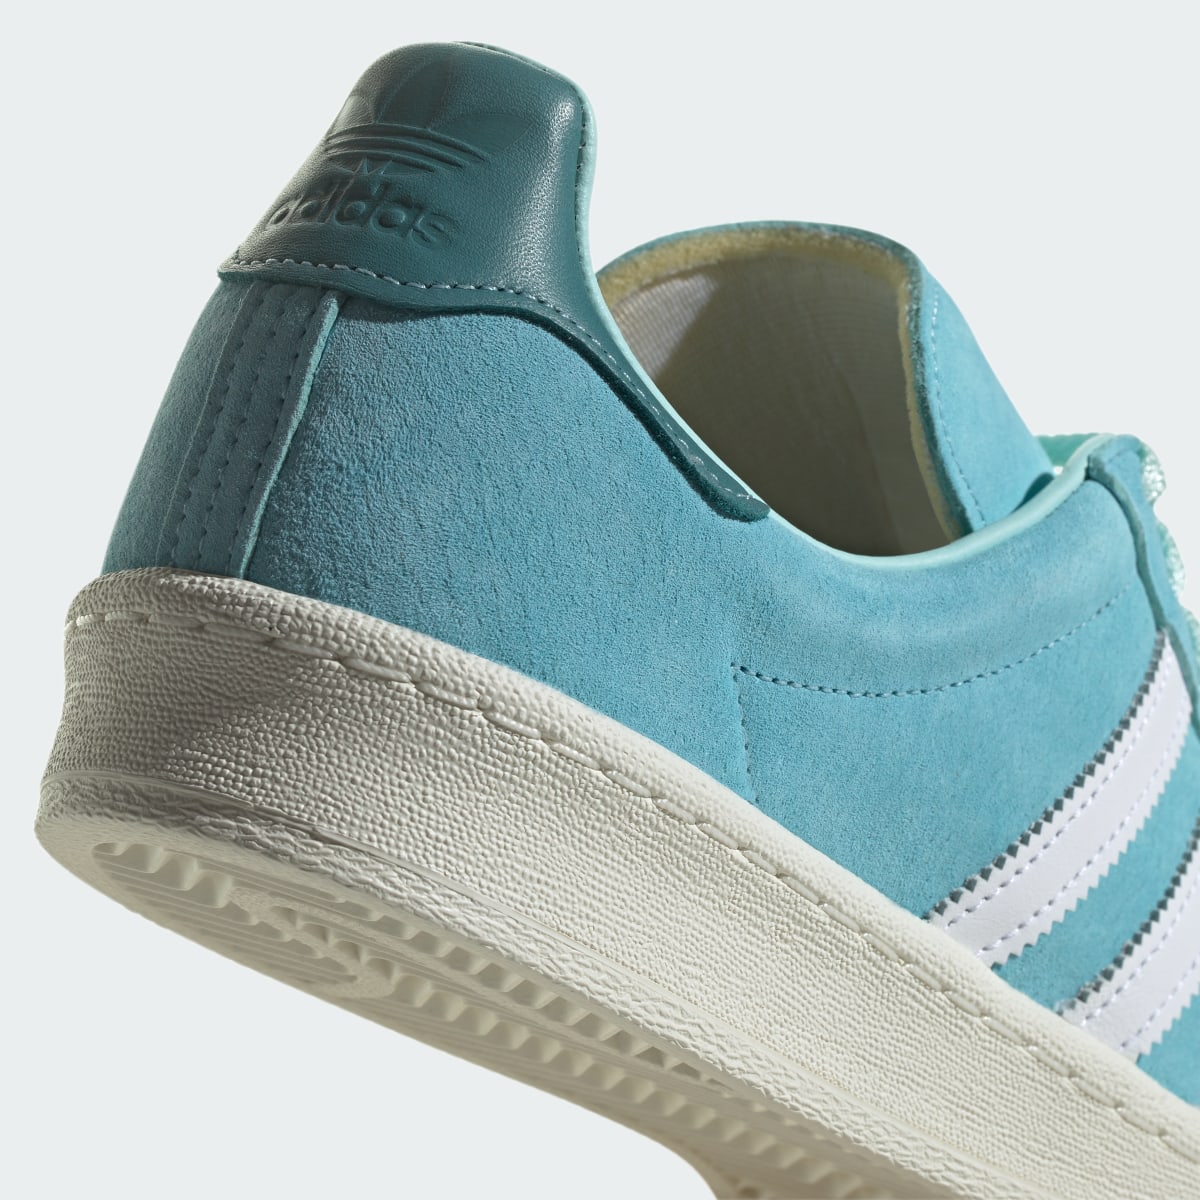 Adidas Campus 80s Shoes. 9